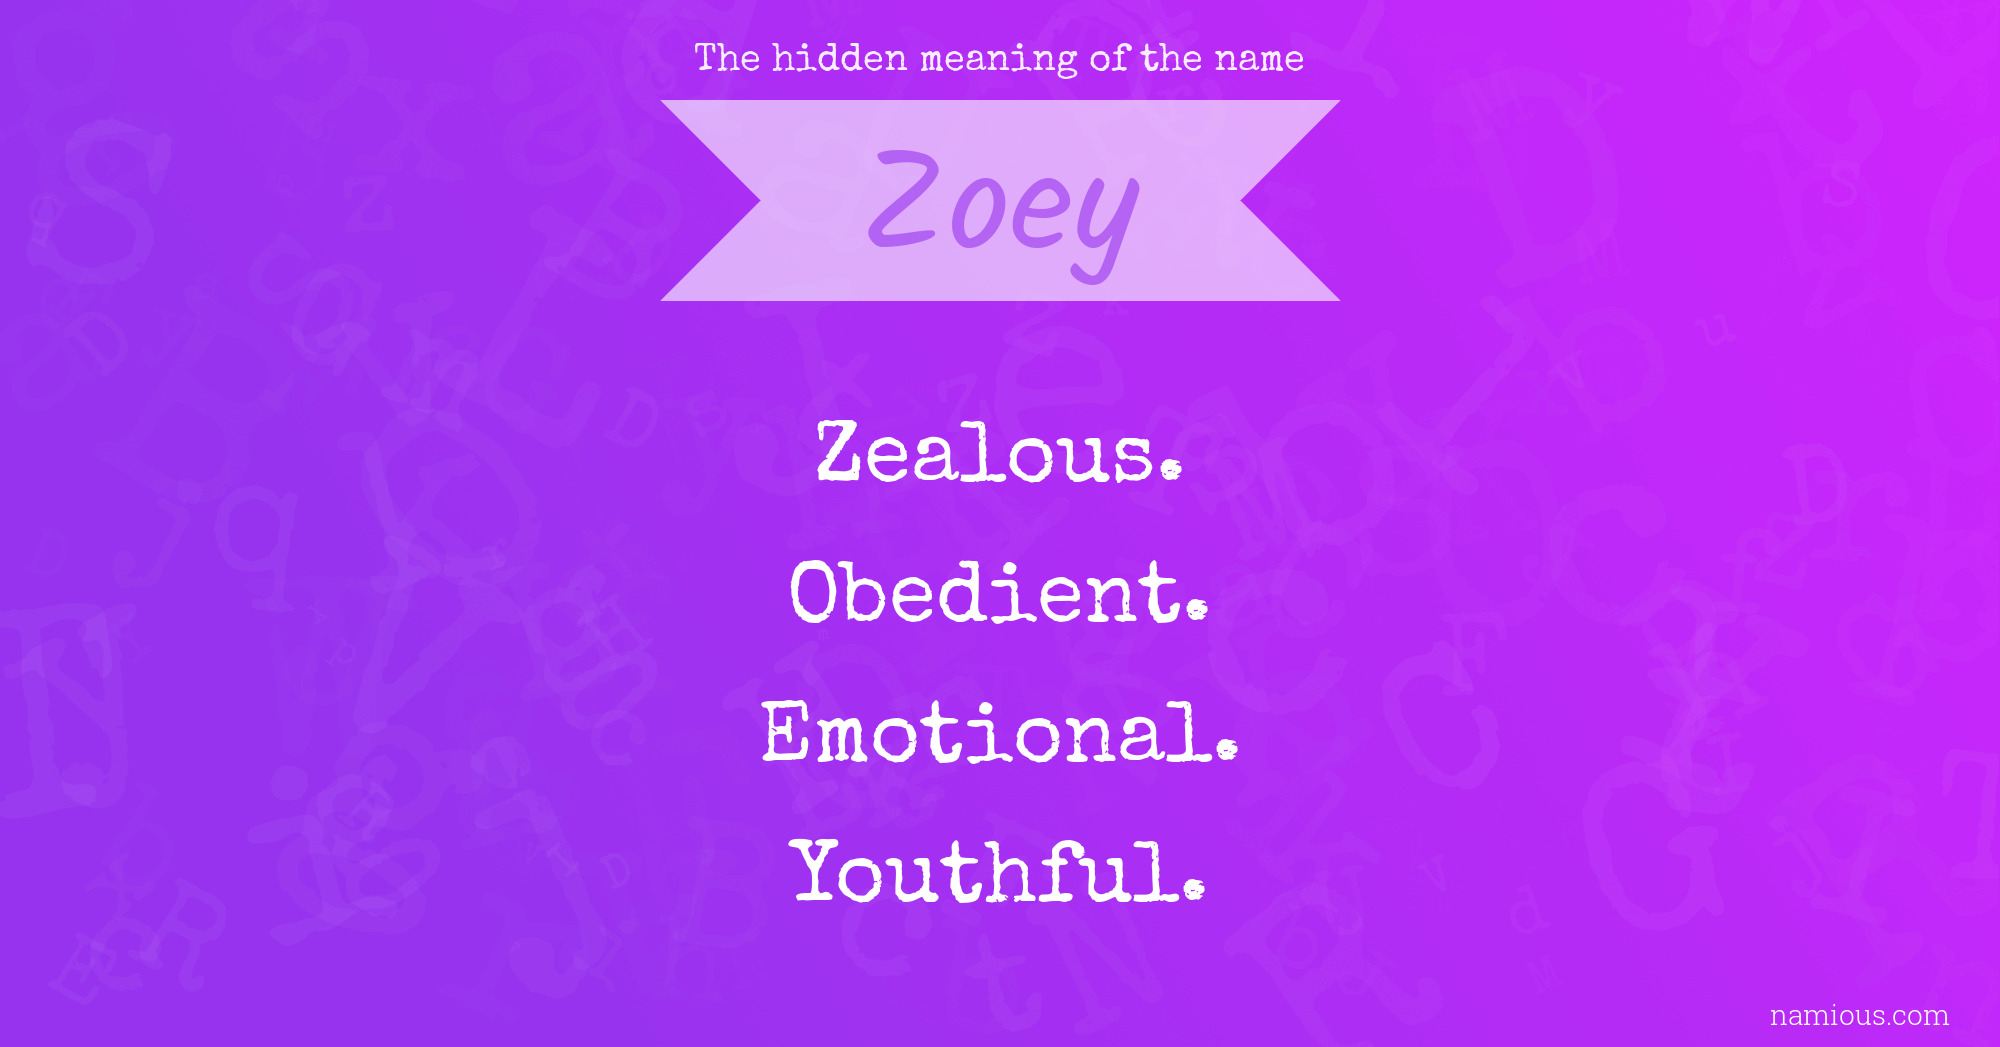 The hidden meaning of the name Zoey